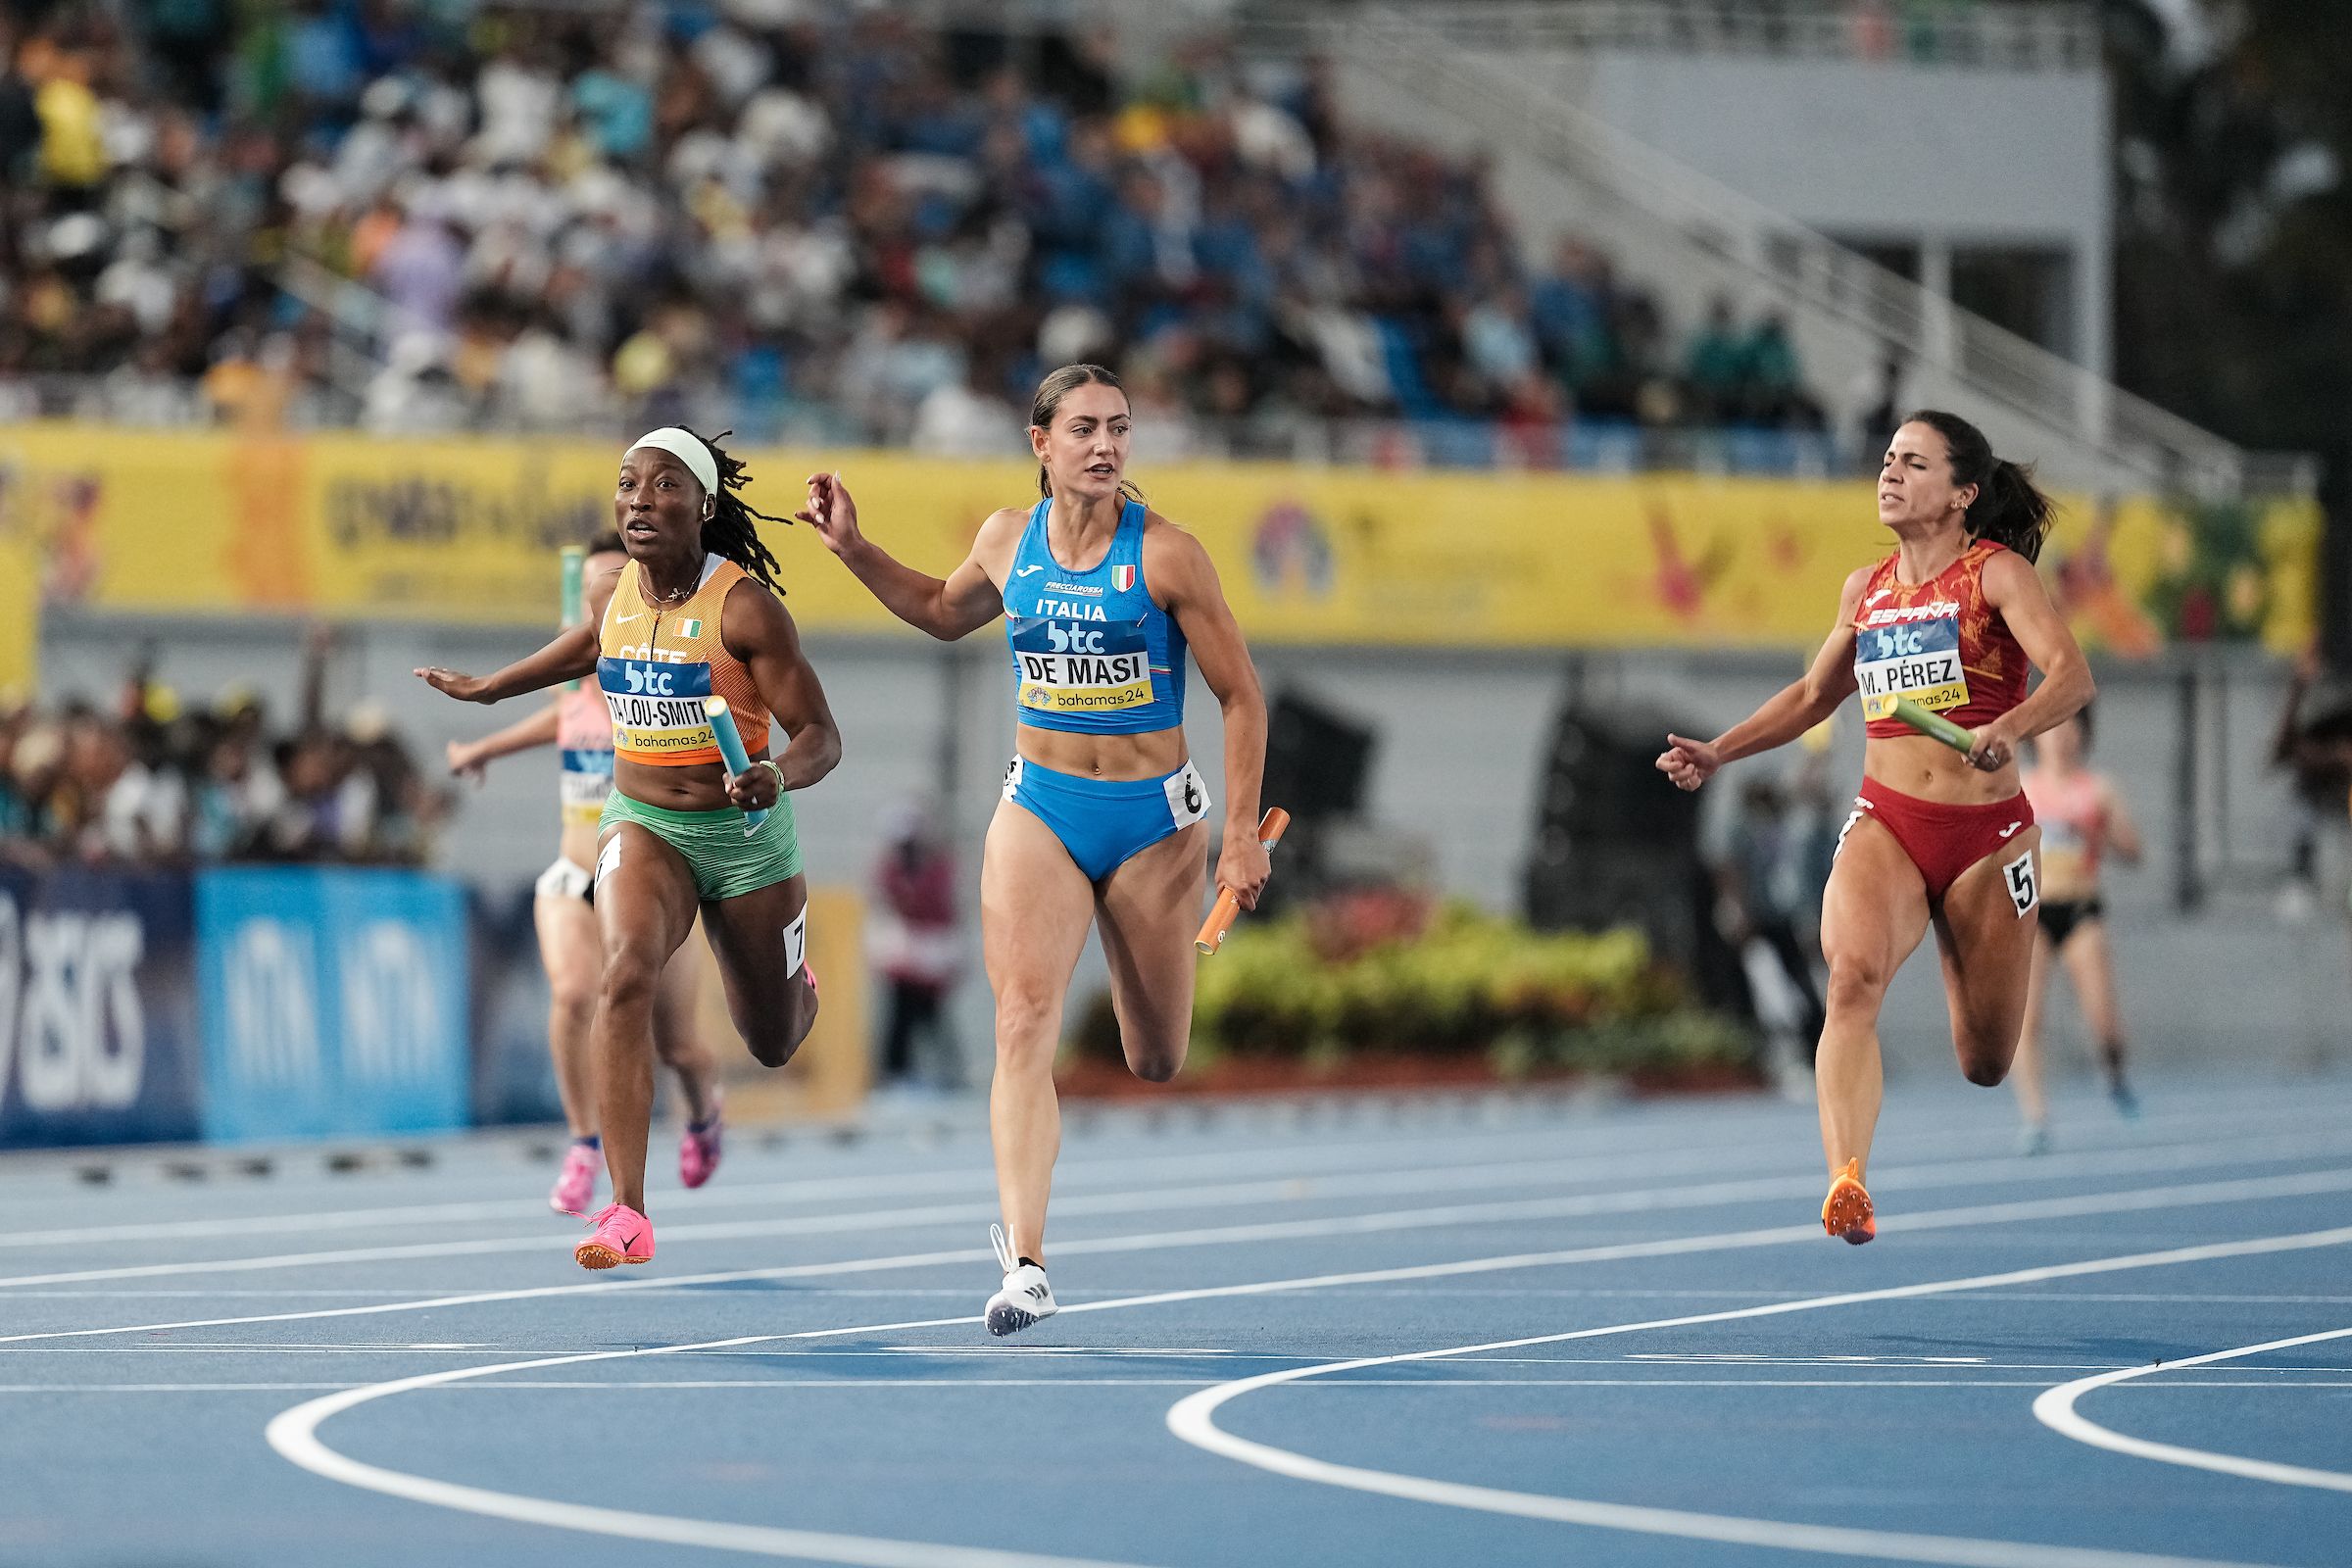 Italy and Cote d’Ivoire secure their 4x100m places for Paris